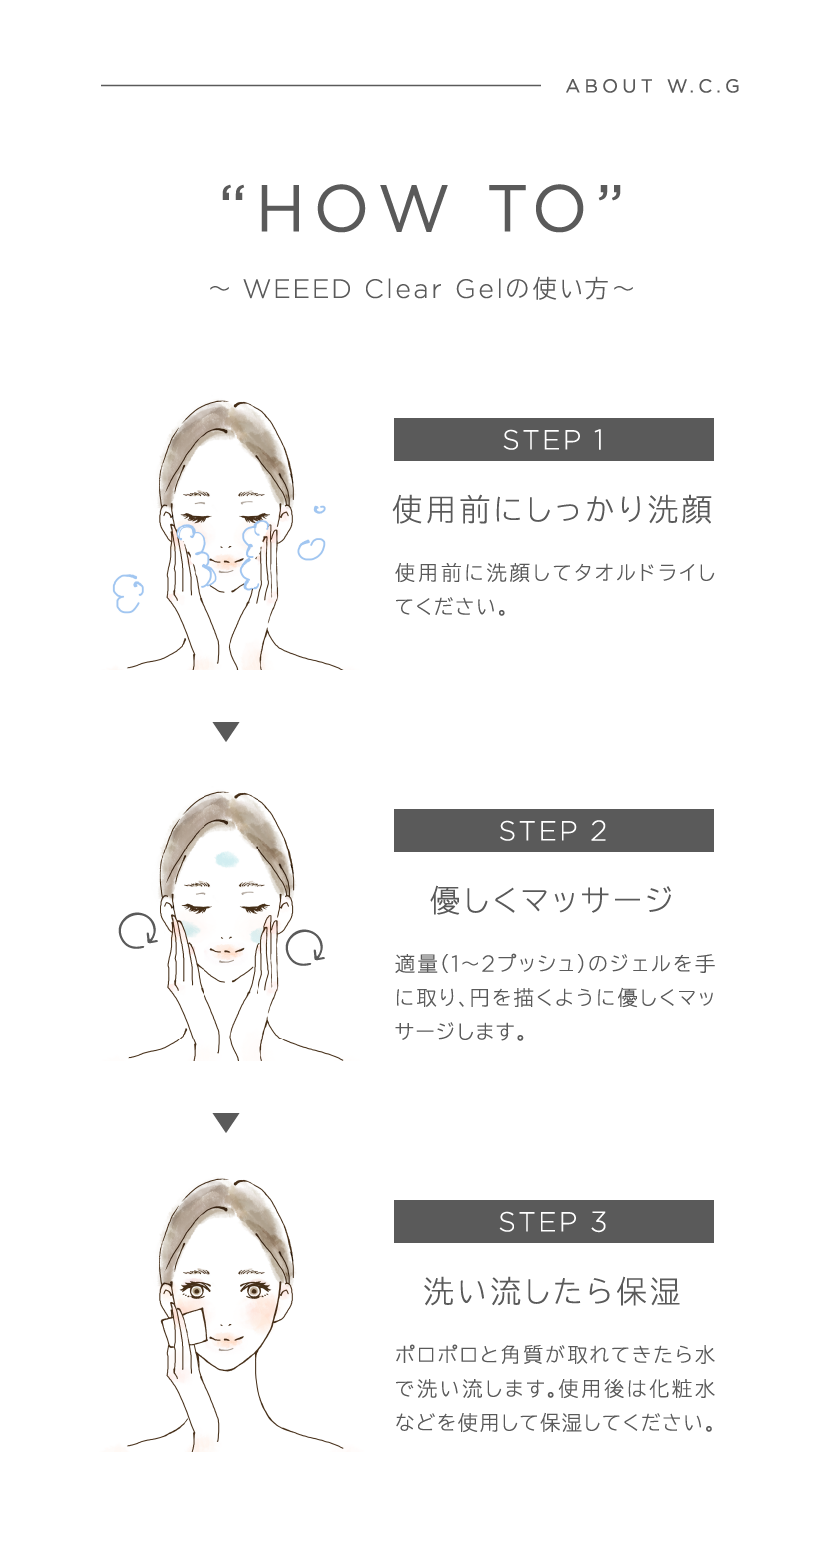 ”HOW TO”～WEEED ClearGelの使い方～